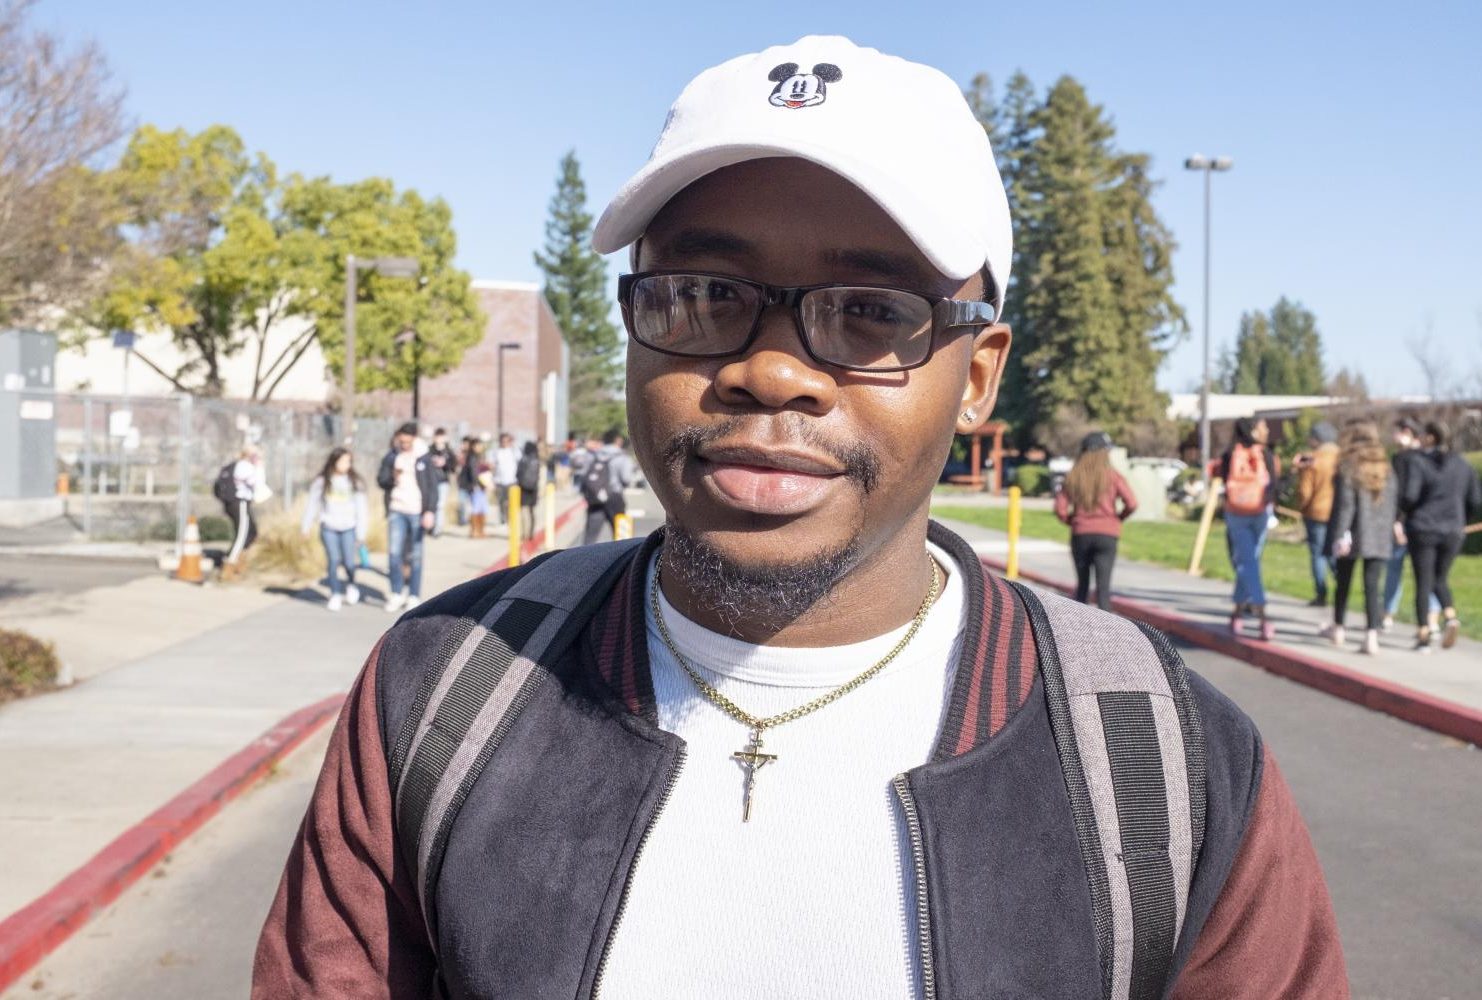 ulius Gbana | Nursing Major  “Basically this new building right here is irritating because you have to go around to go to the library and stuff like that. … Since last semester they put this barrier in right here and I think that’s why people started going around to go to the library.”